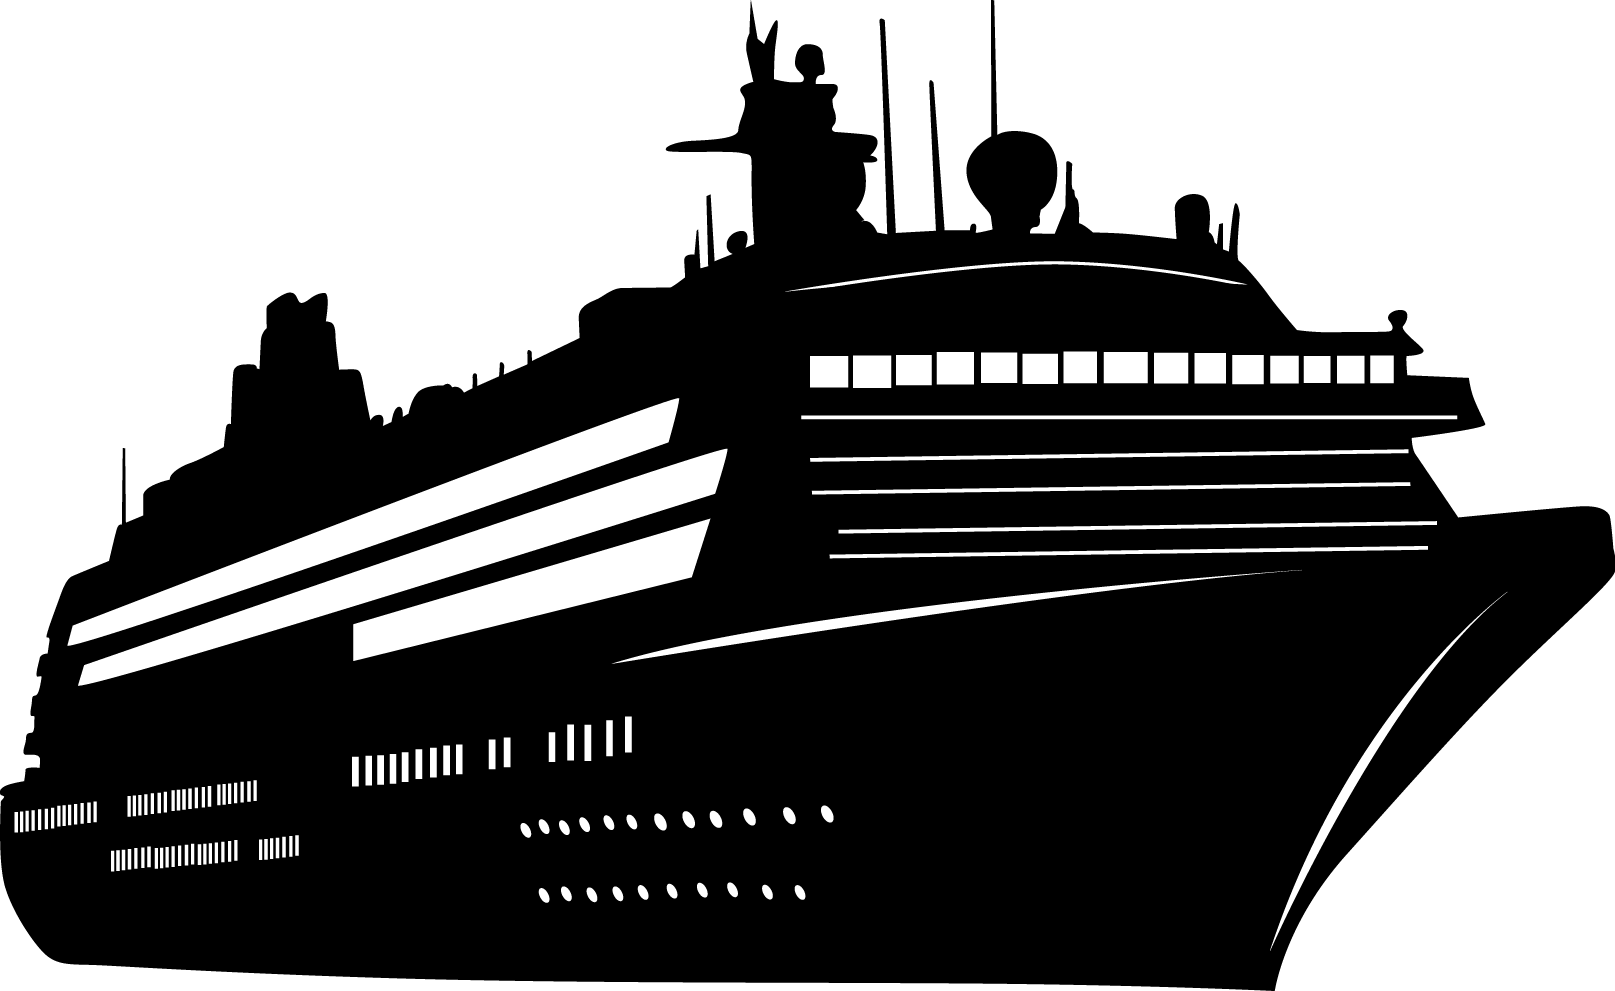 View large size Transparent Cruise Ship Silhouette - Cruise Ship Silhouette...